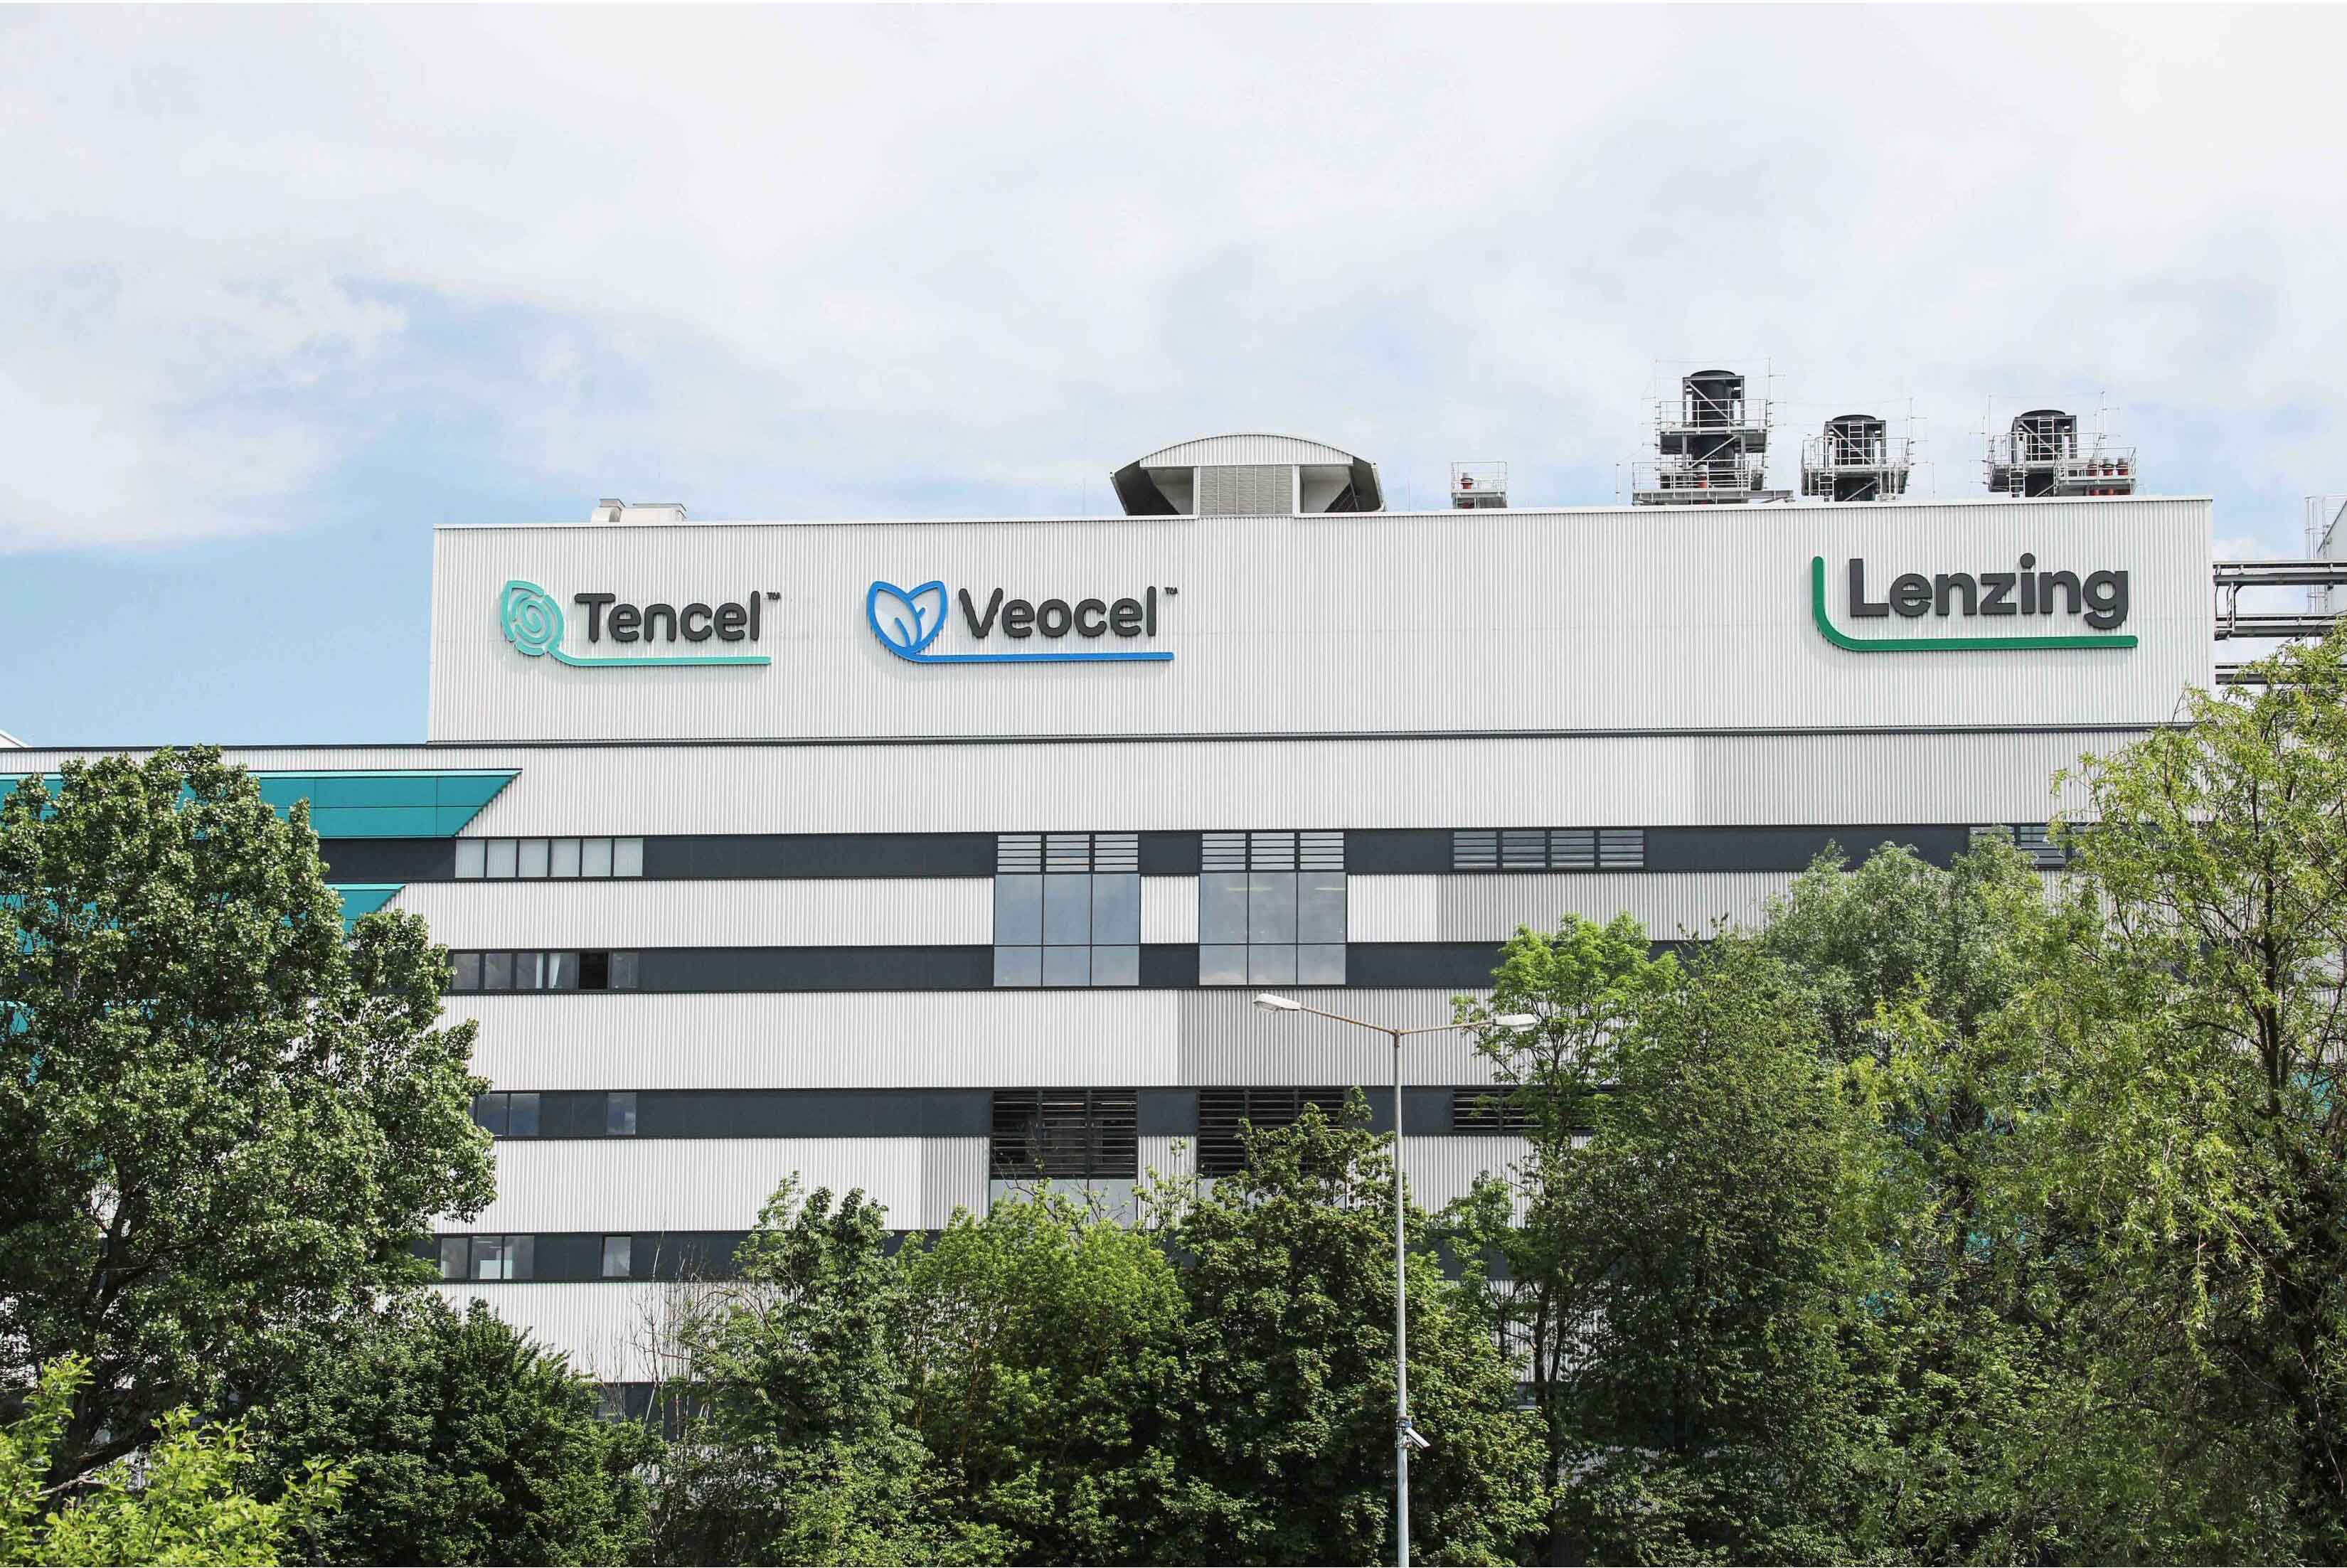 Lenzing raises the bar significantly in the fight against the climate crisis and aligns its targets with the 1.5-degree limit